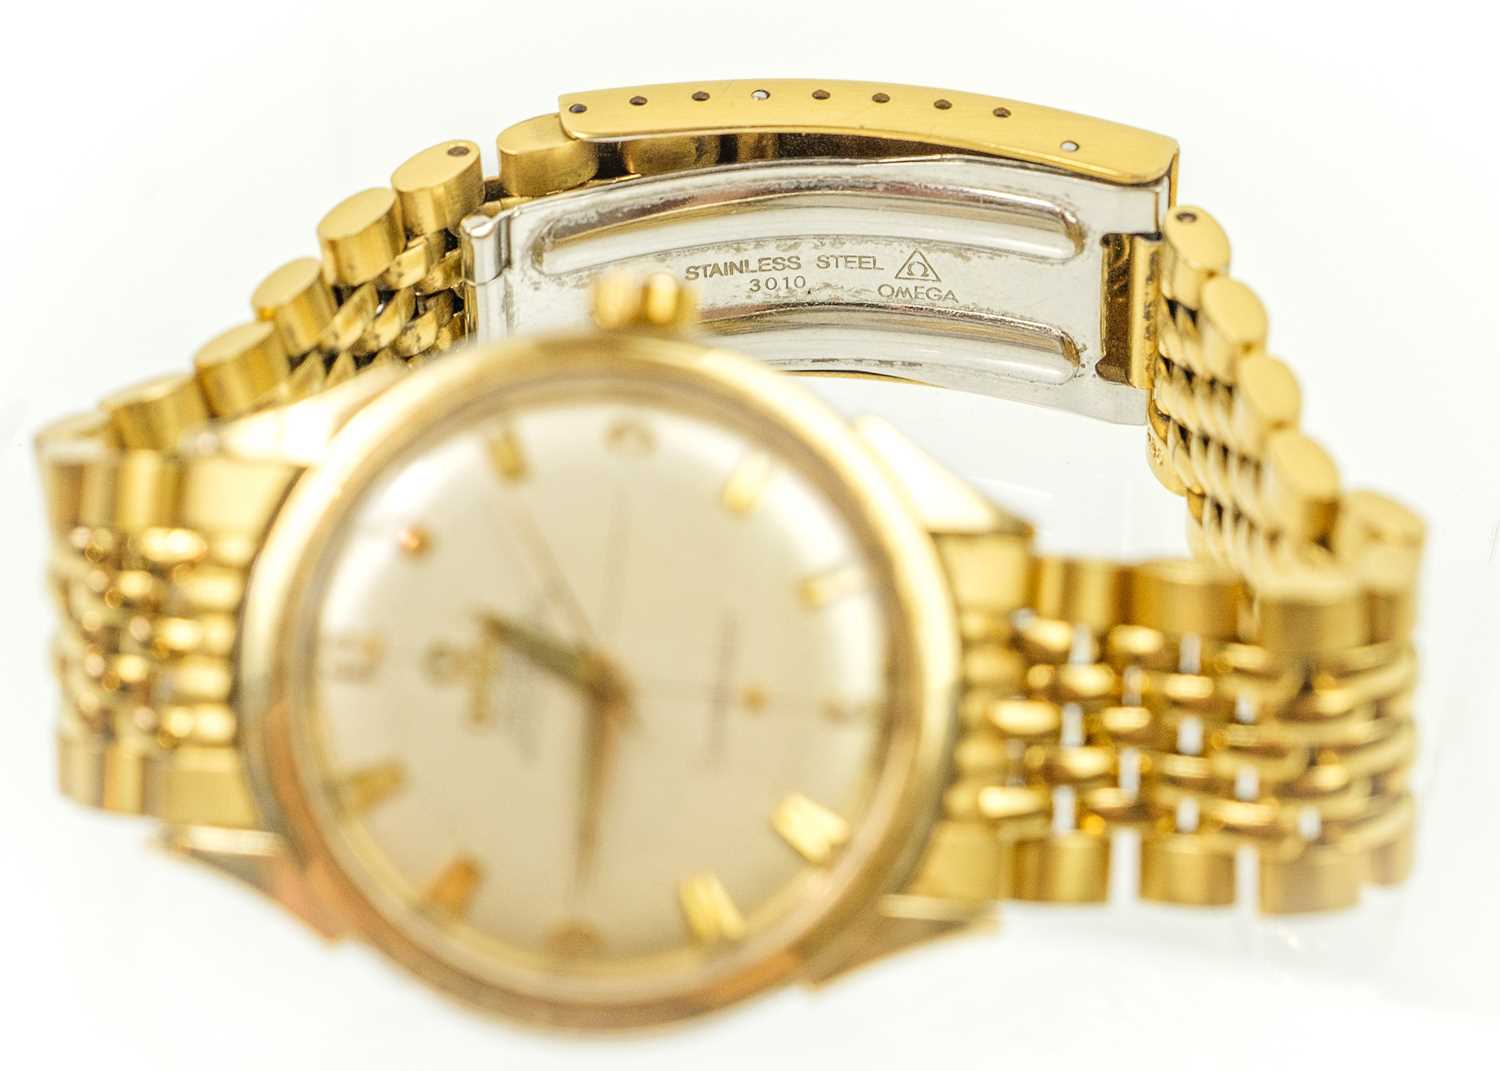 OMEGA - A Constellation Automatic chronometer gentleman's gold capped bracelet wristwatch. - Image 3 of 3